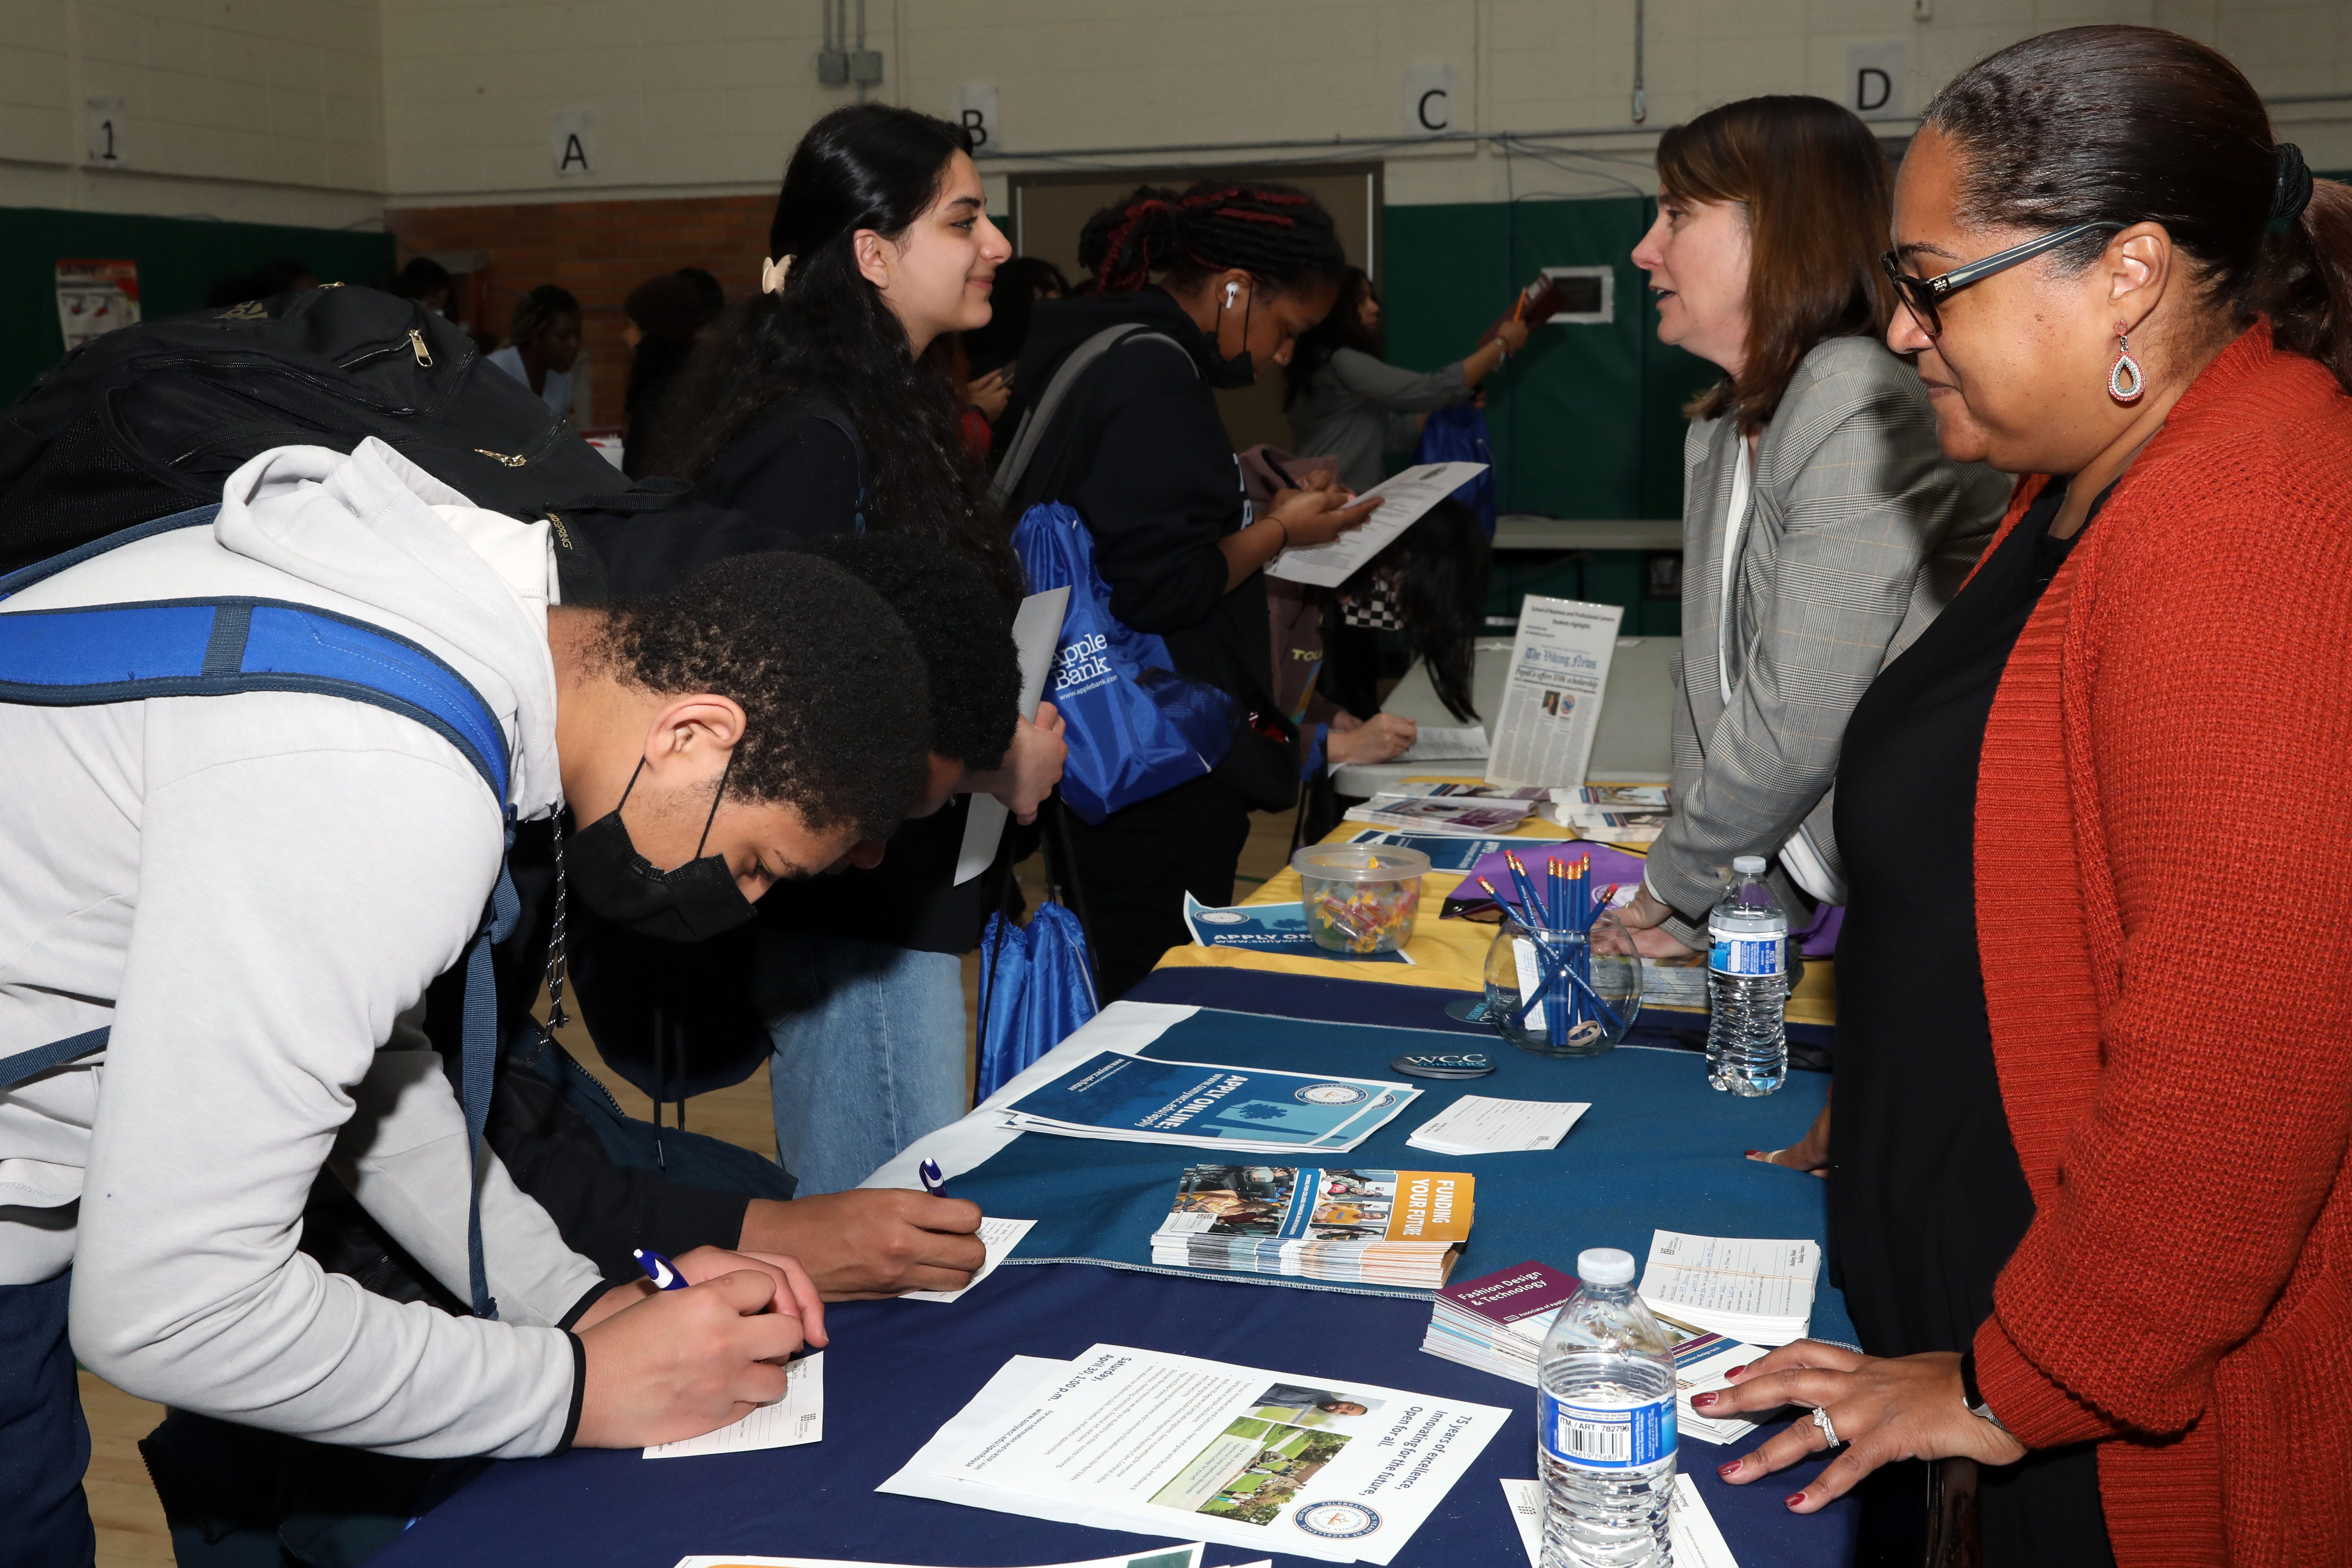 Students visit the Westchester Community College booth at the College and Career Fair at Gorton High School on March 23, 2022, in Yonkers.